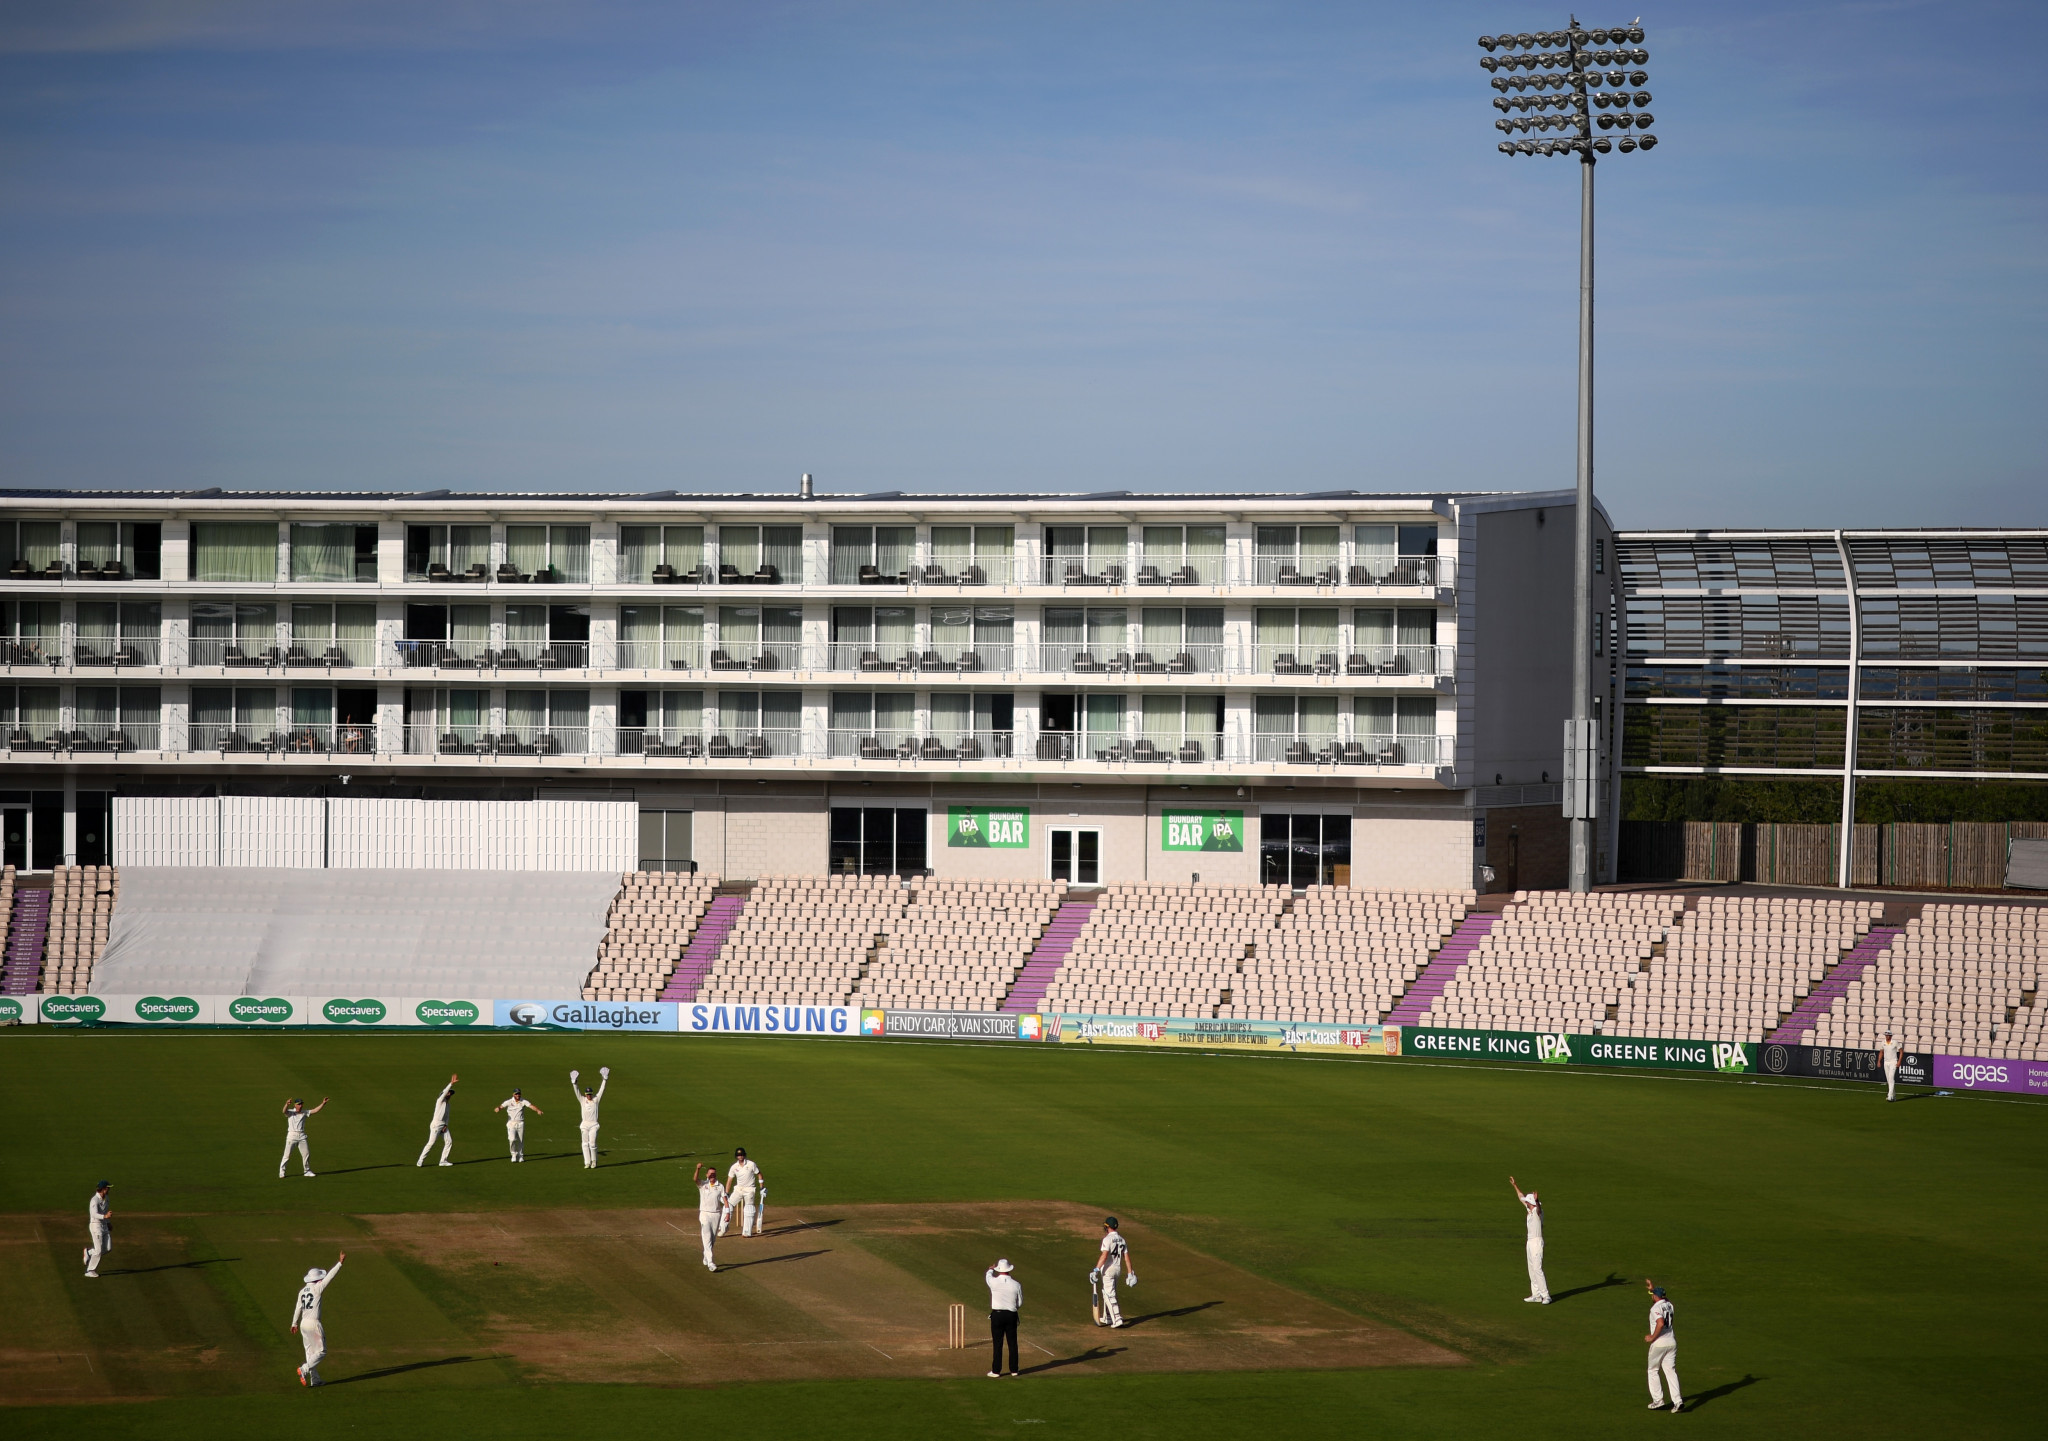 It England, it is hoped that international cricket can soon be played at venues with on-site hotels like the Ageas Bowl ©Getty Images